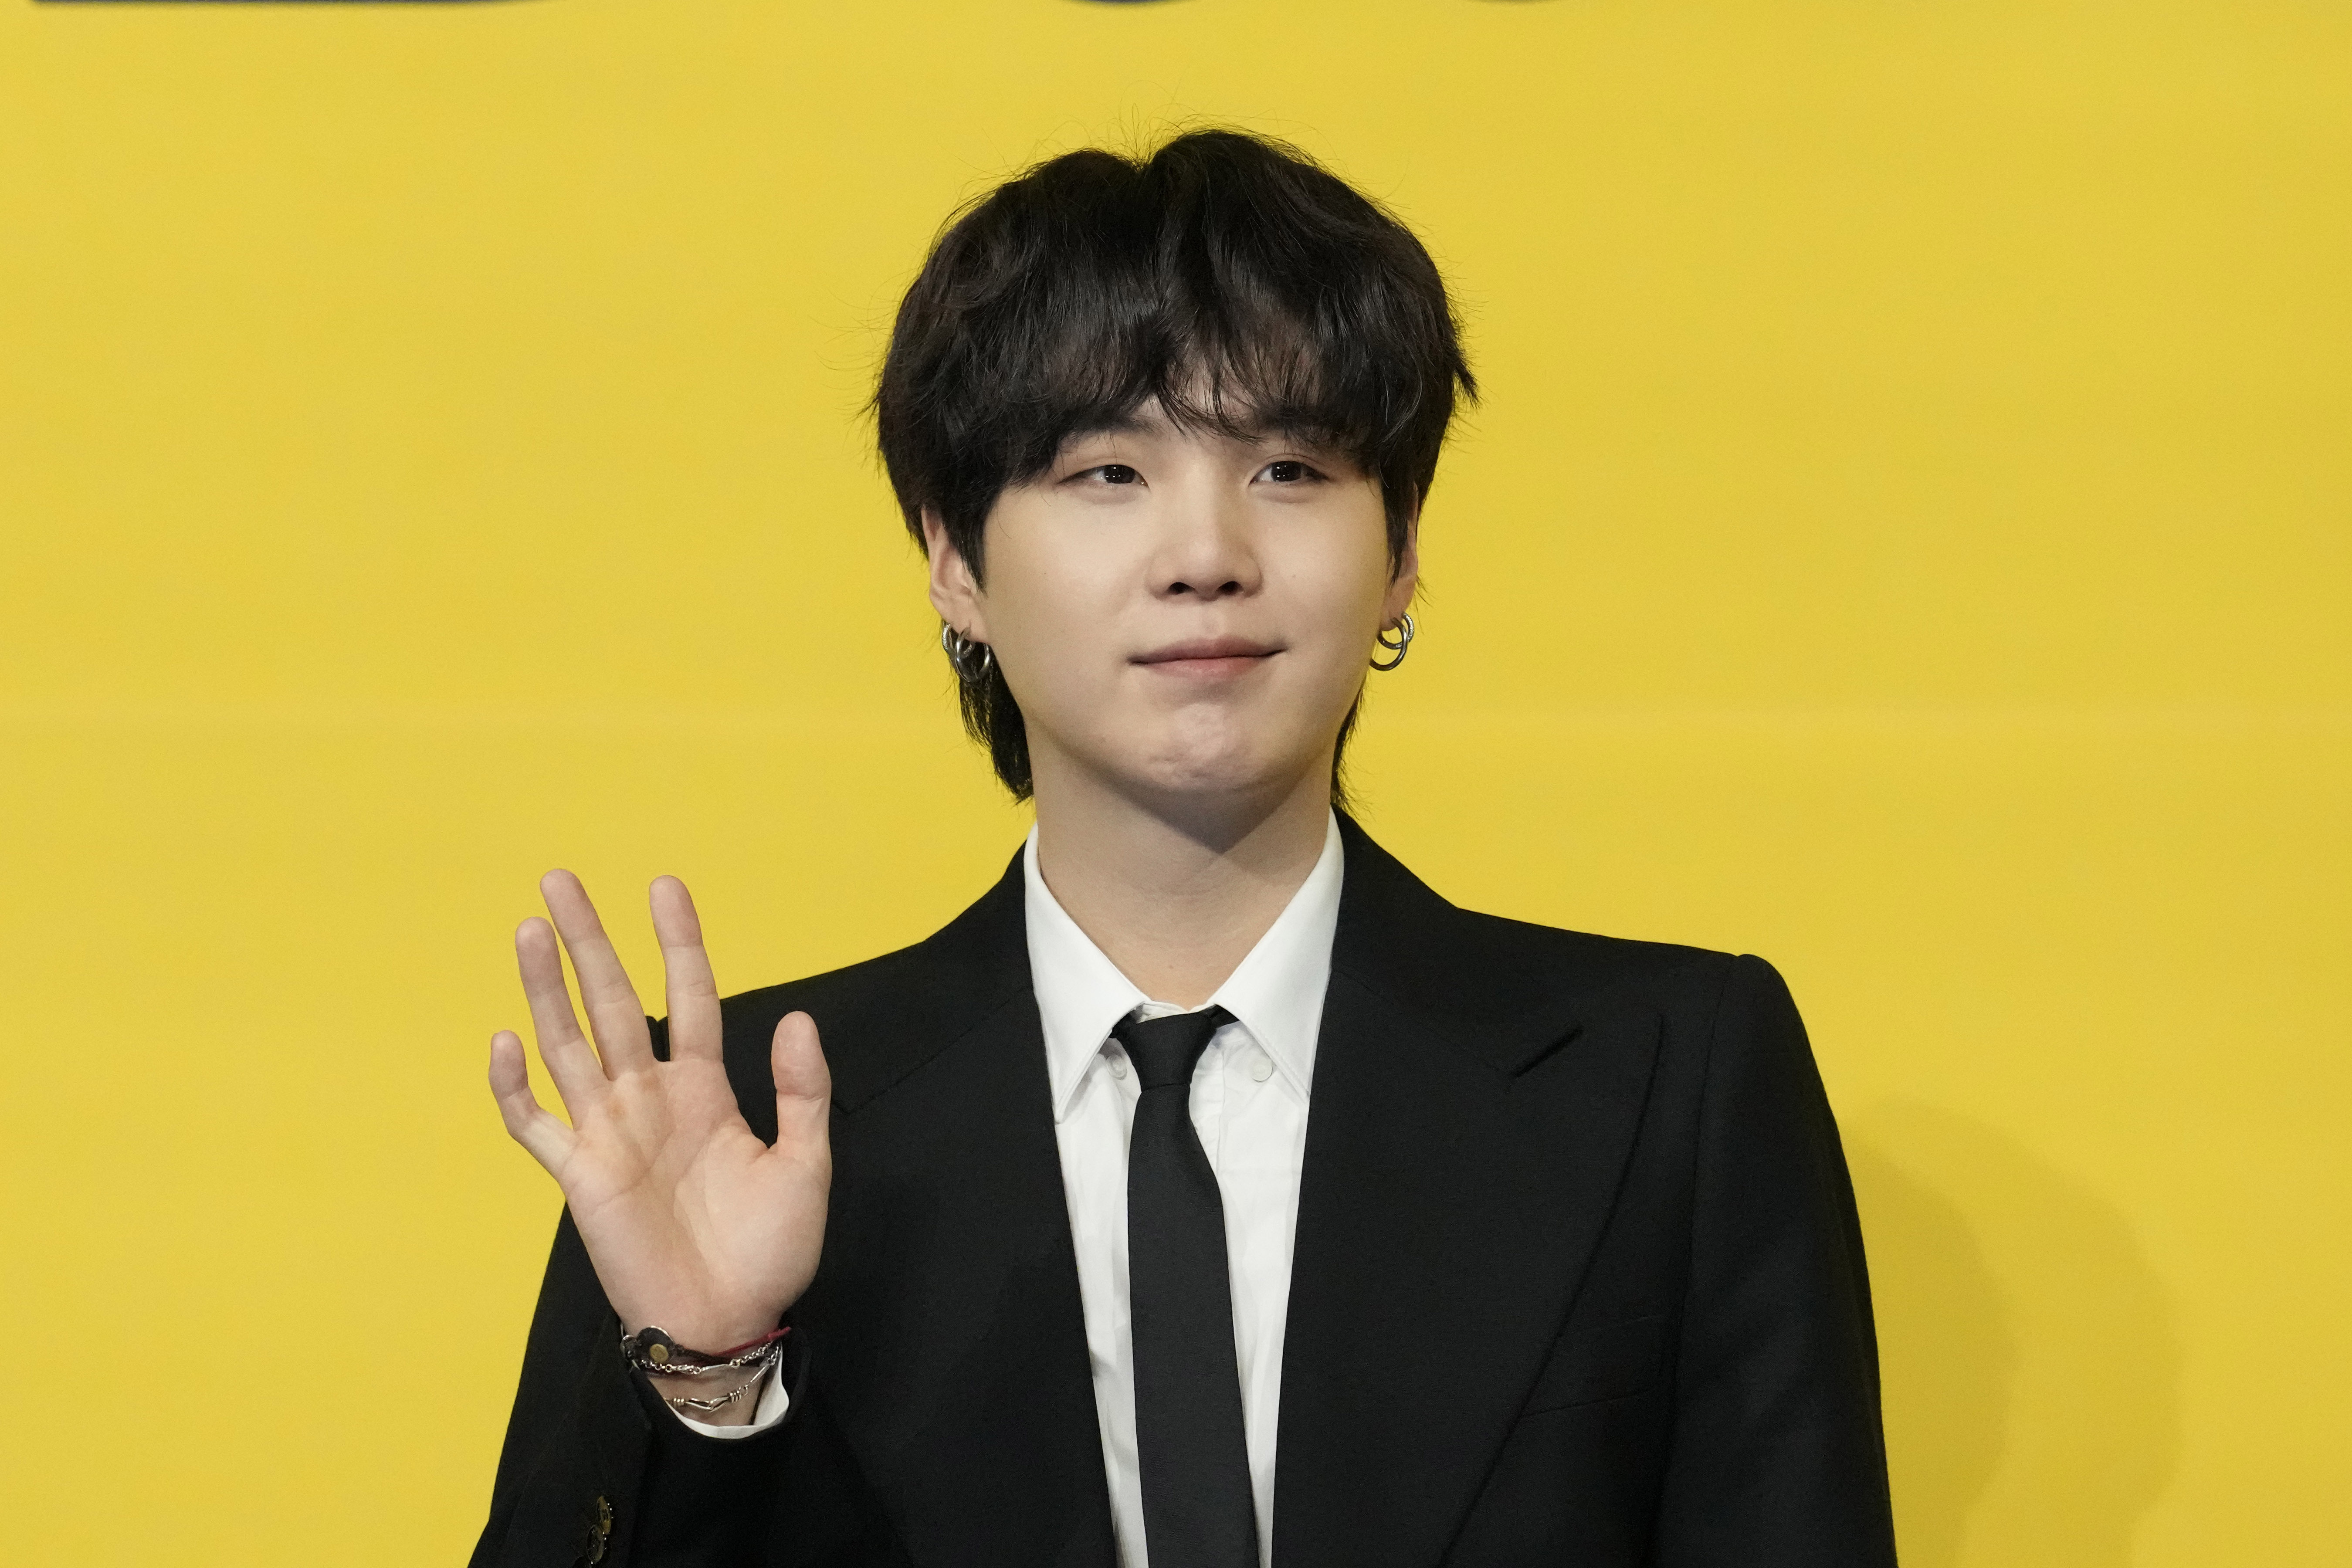 BTS' Suga starts military service this week, and his label is